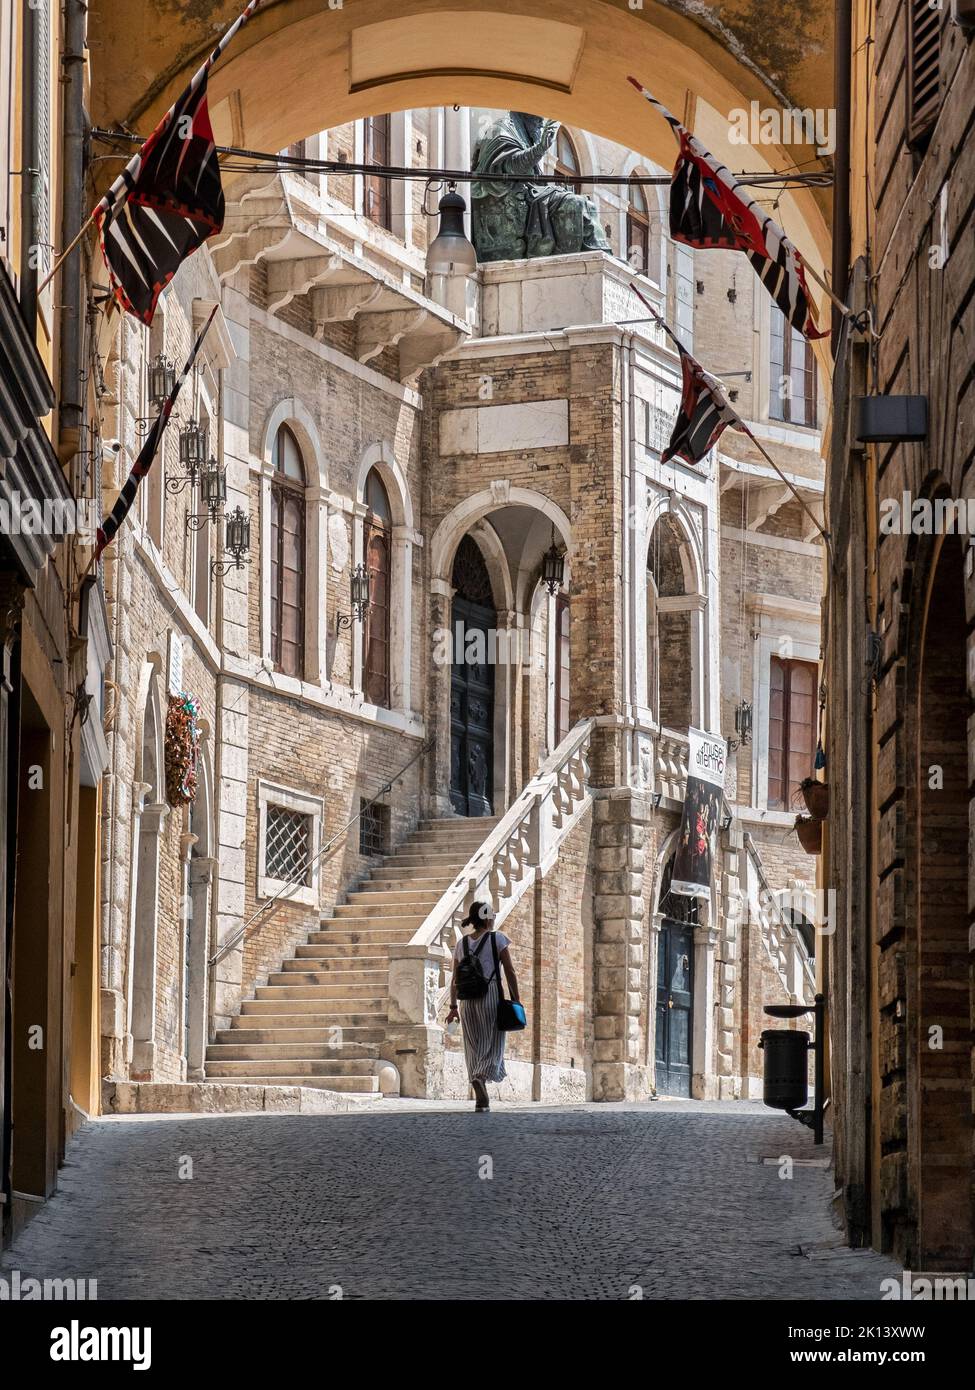 Fermo, Marche, Italy. Medieval Priory Palace seen from the vault that leads to Piazza del Popolo in Fermo. Stock Photo